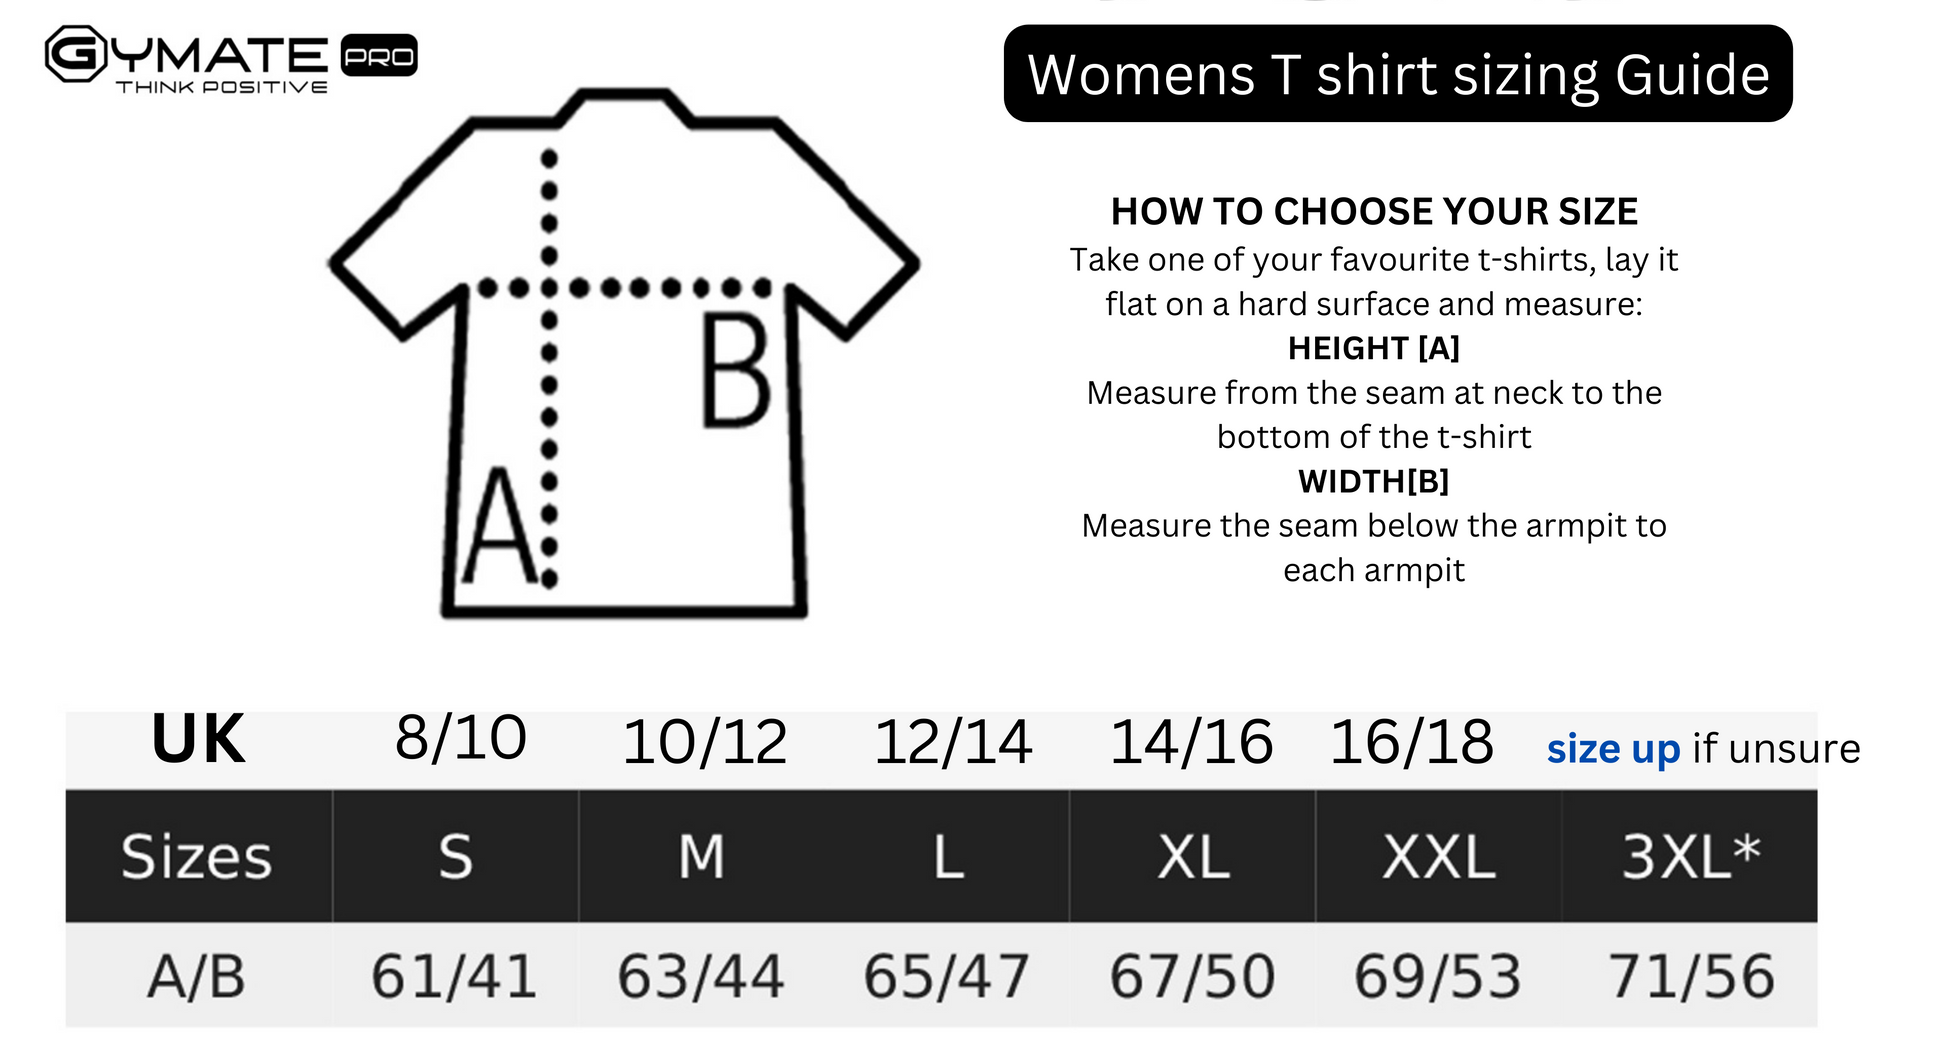 Designer womens T shirts for women Gymate logo size guide